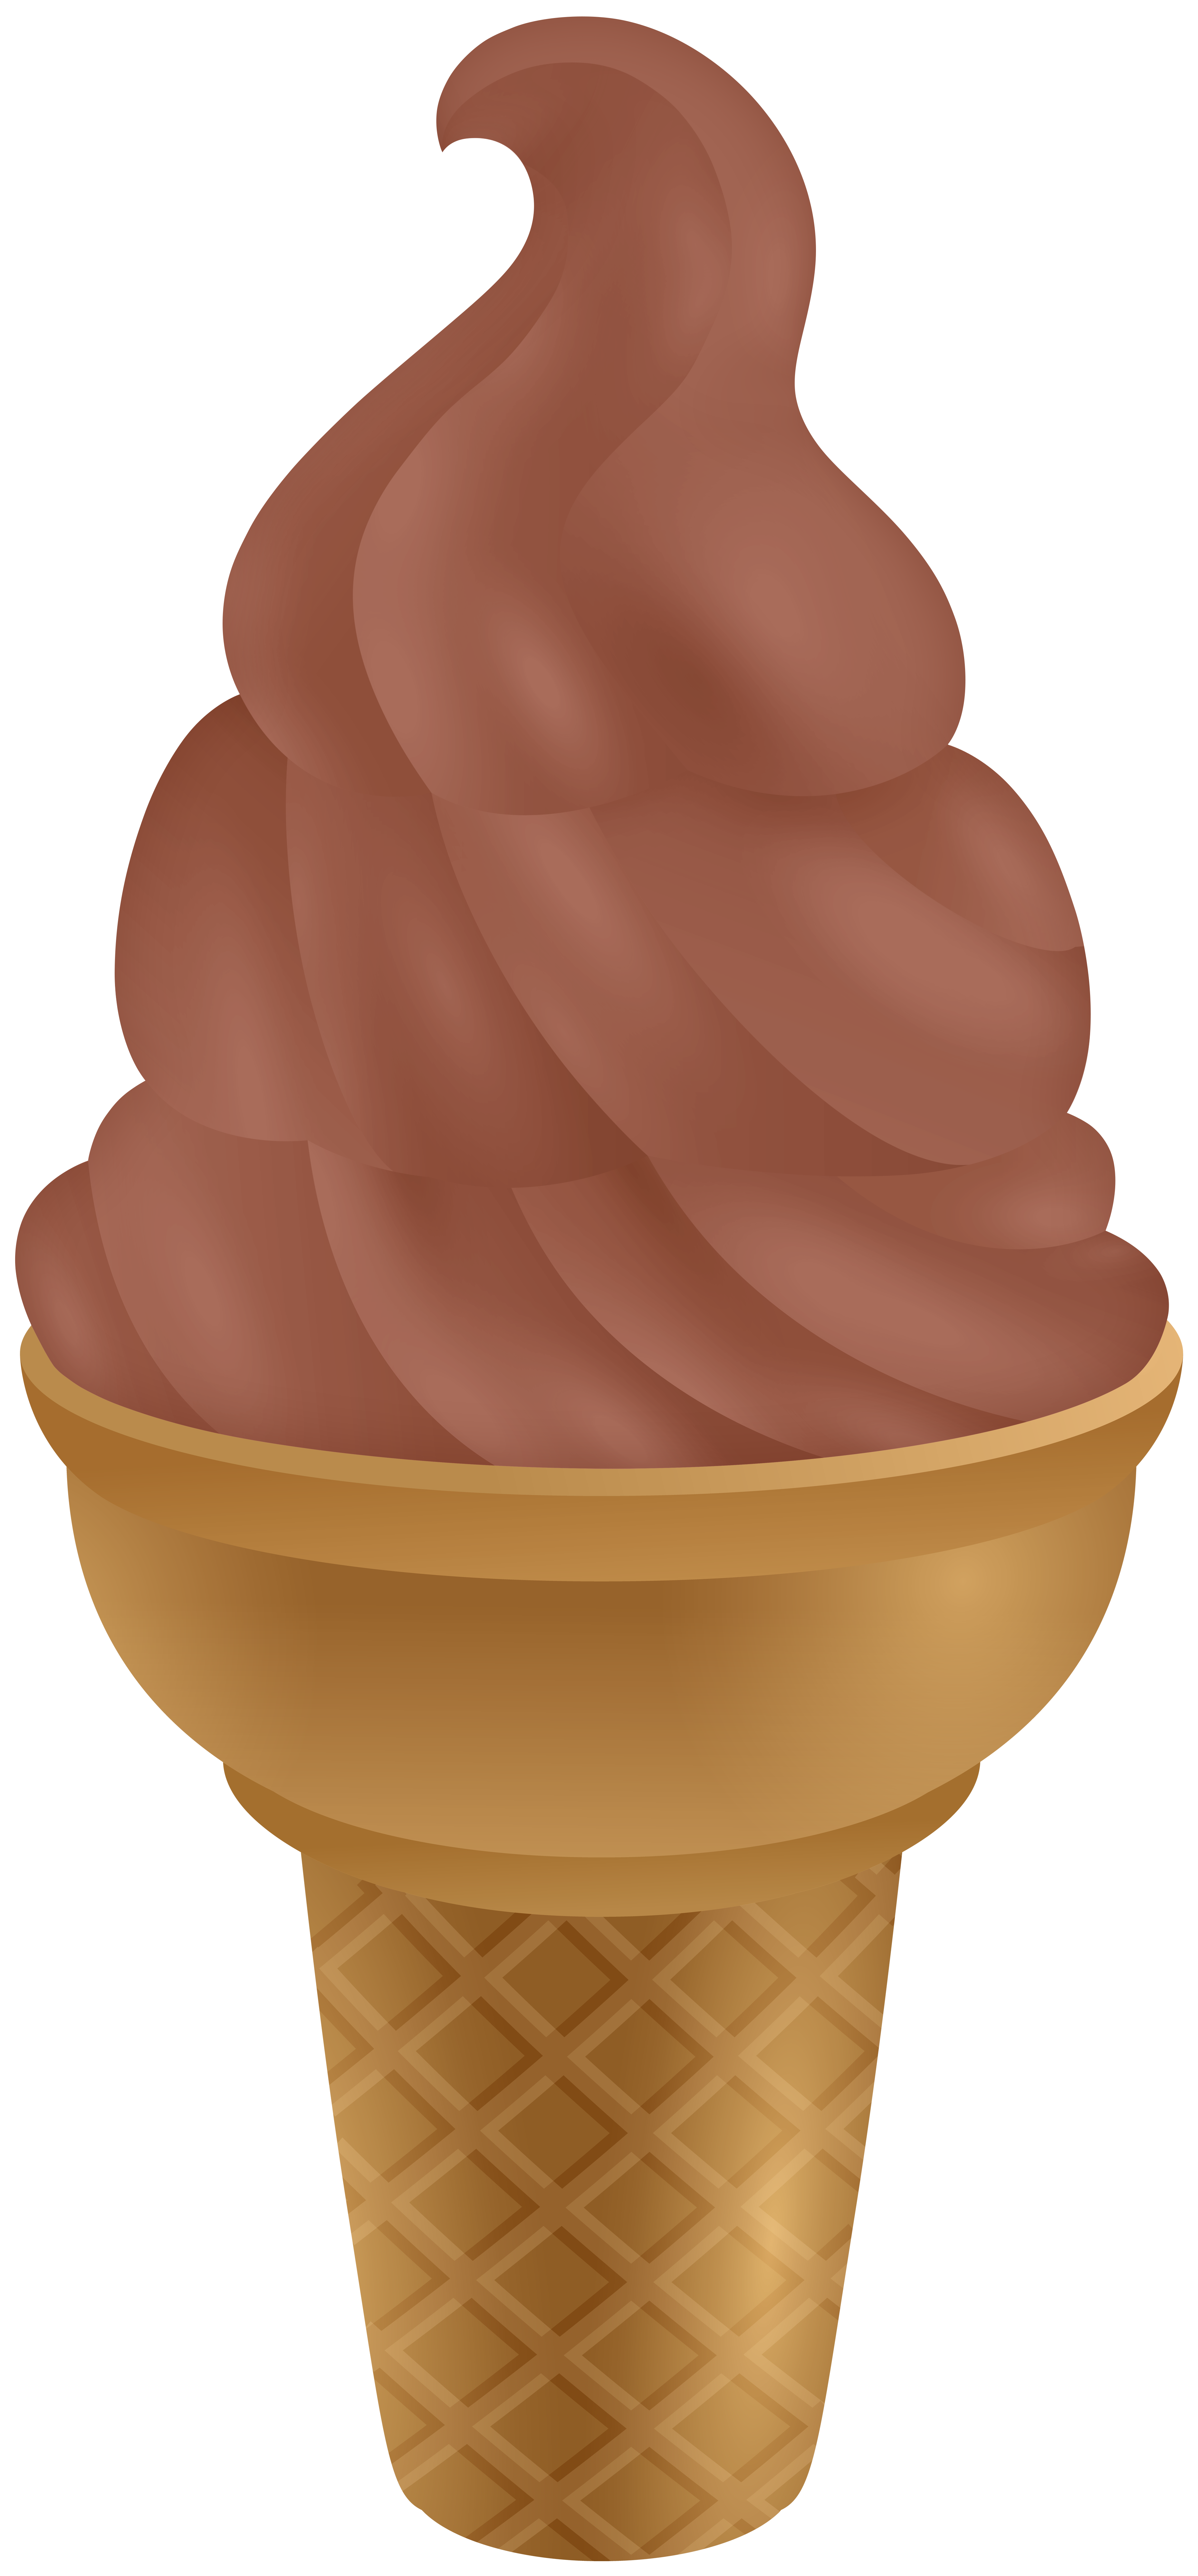 Chocolate Ice Cream Cone PNG Clipart​ | Gallery Yopriceville - High-Quality  Free Images and Transparent PNG Clipart